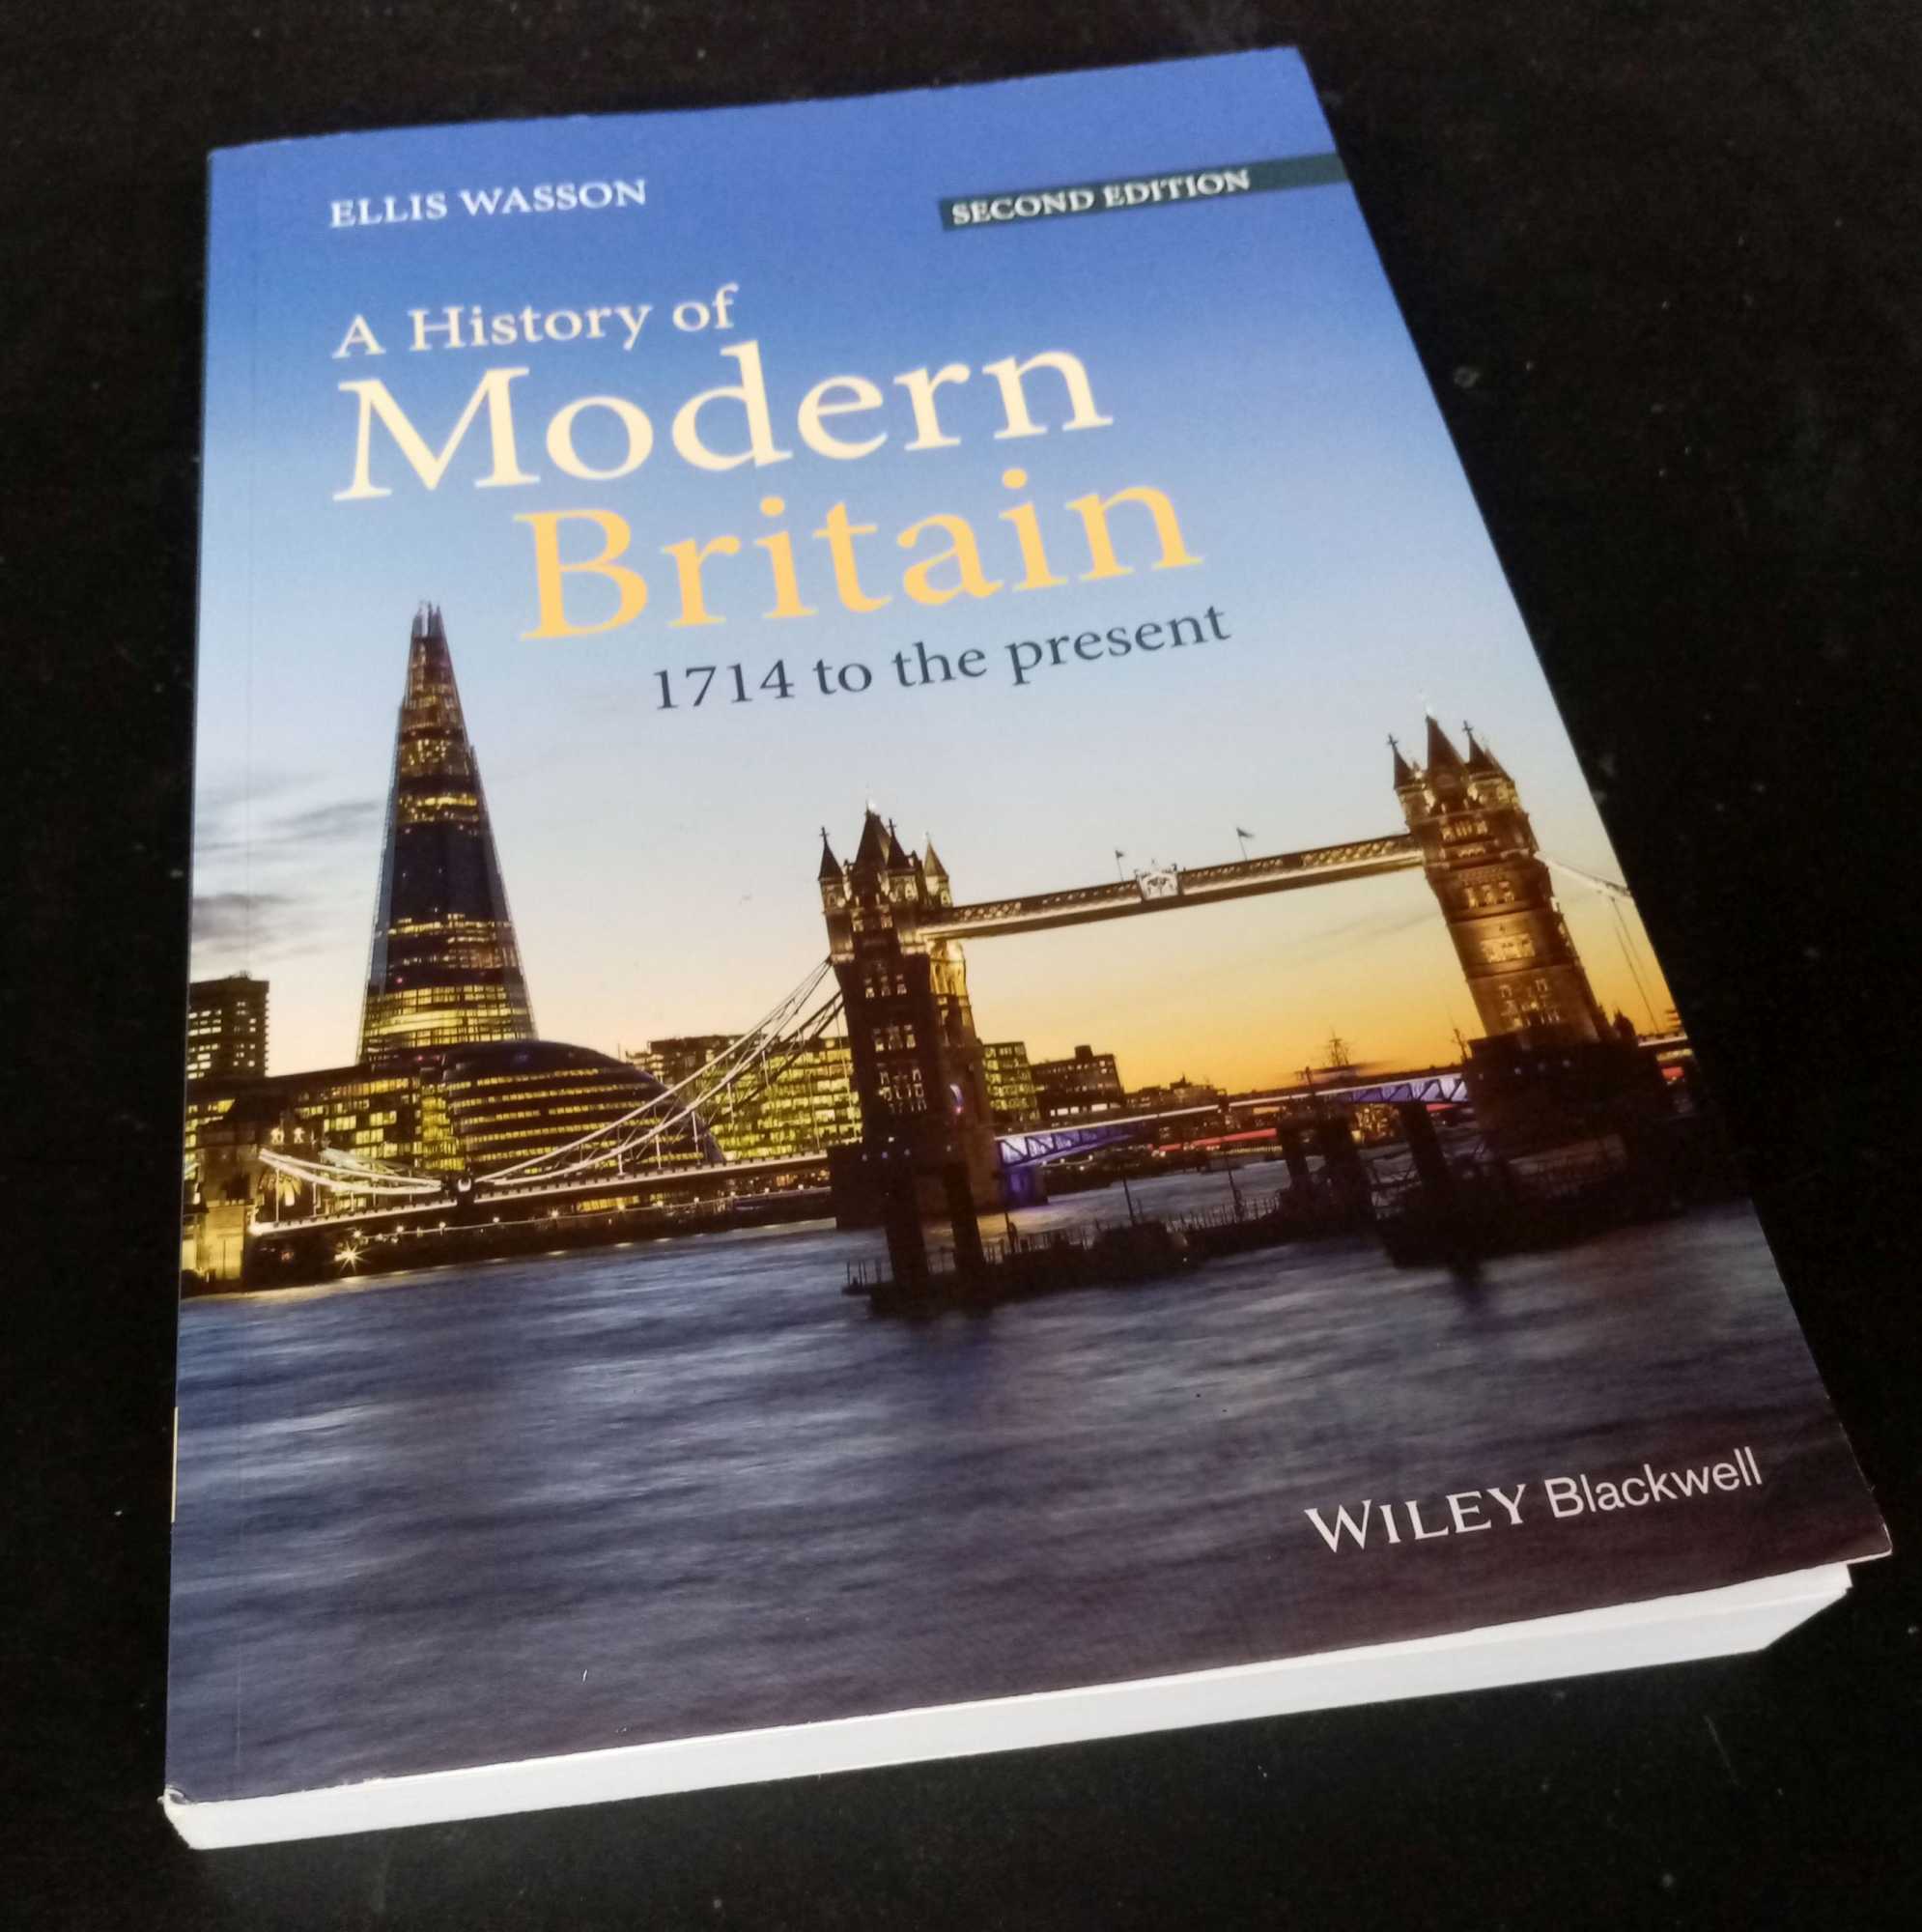 Ellis Wasson - A History of Modern Britain: 1714 to the Present, 2nd Edition